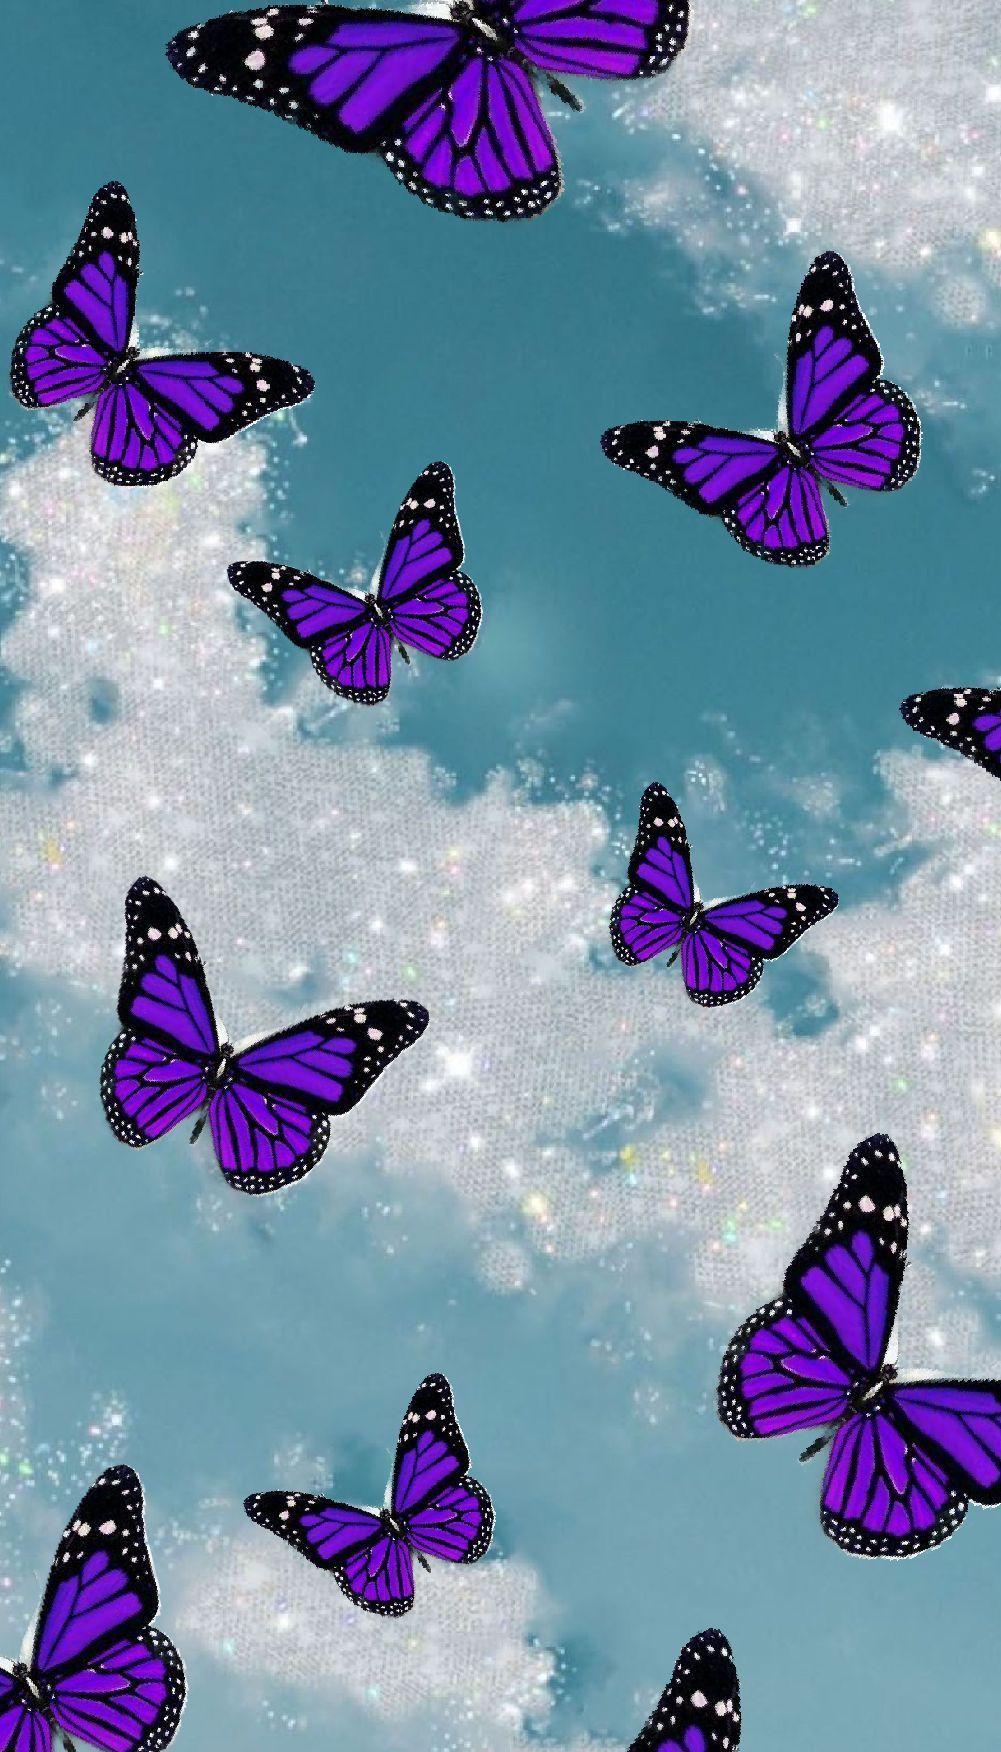 10 Perfect light purple butterfly wallpaper aesthetic You Can Use It ...